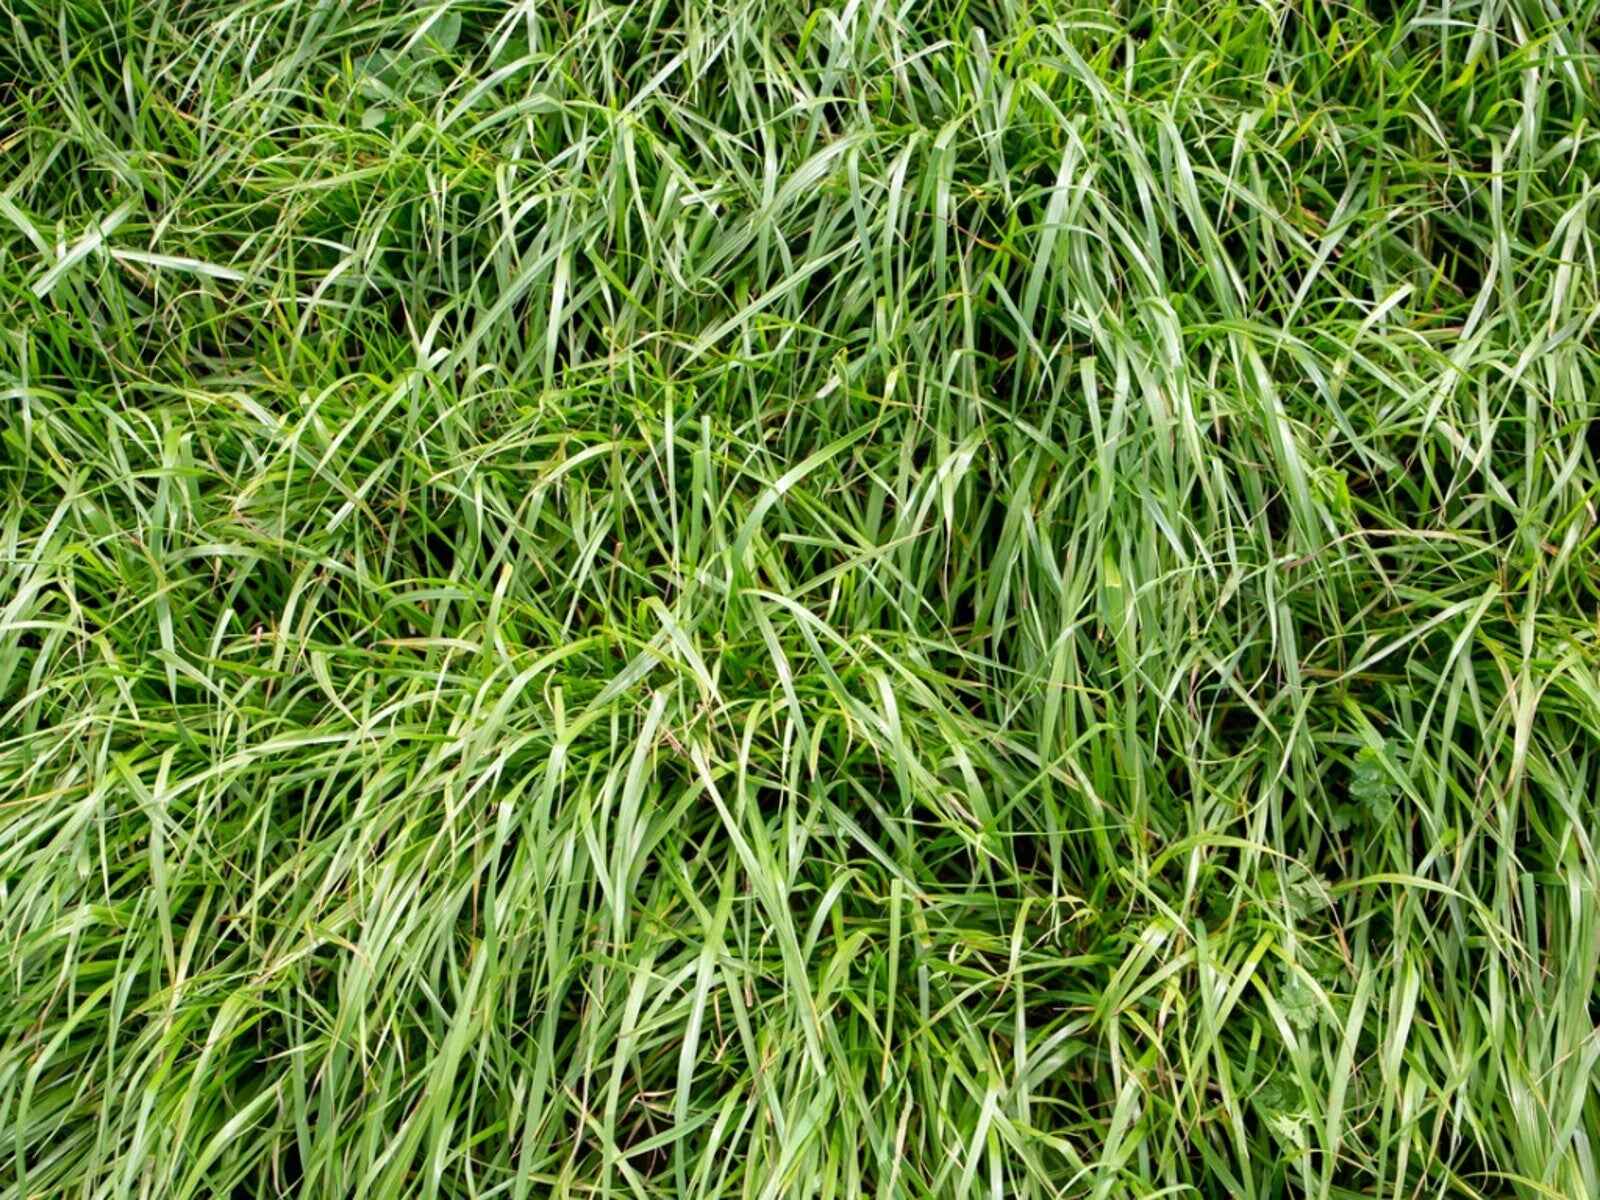 How To Seed Ryegrass